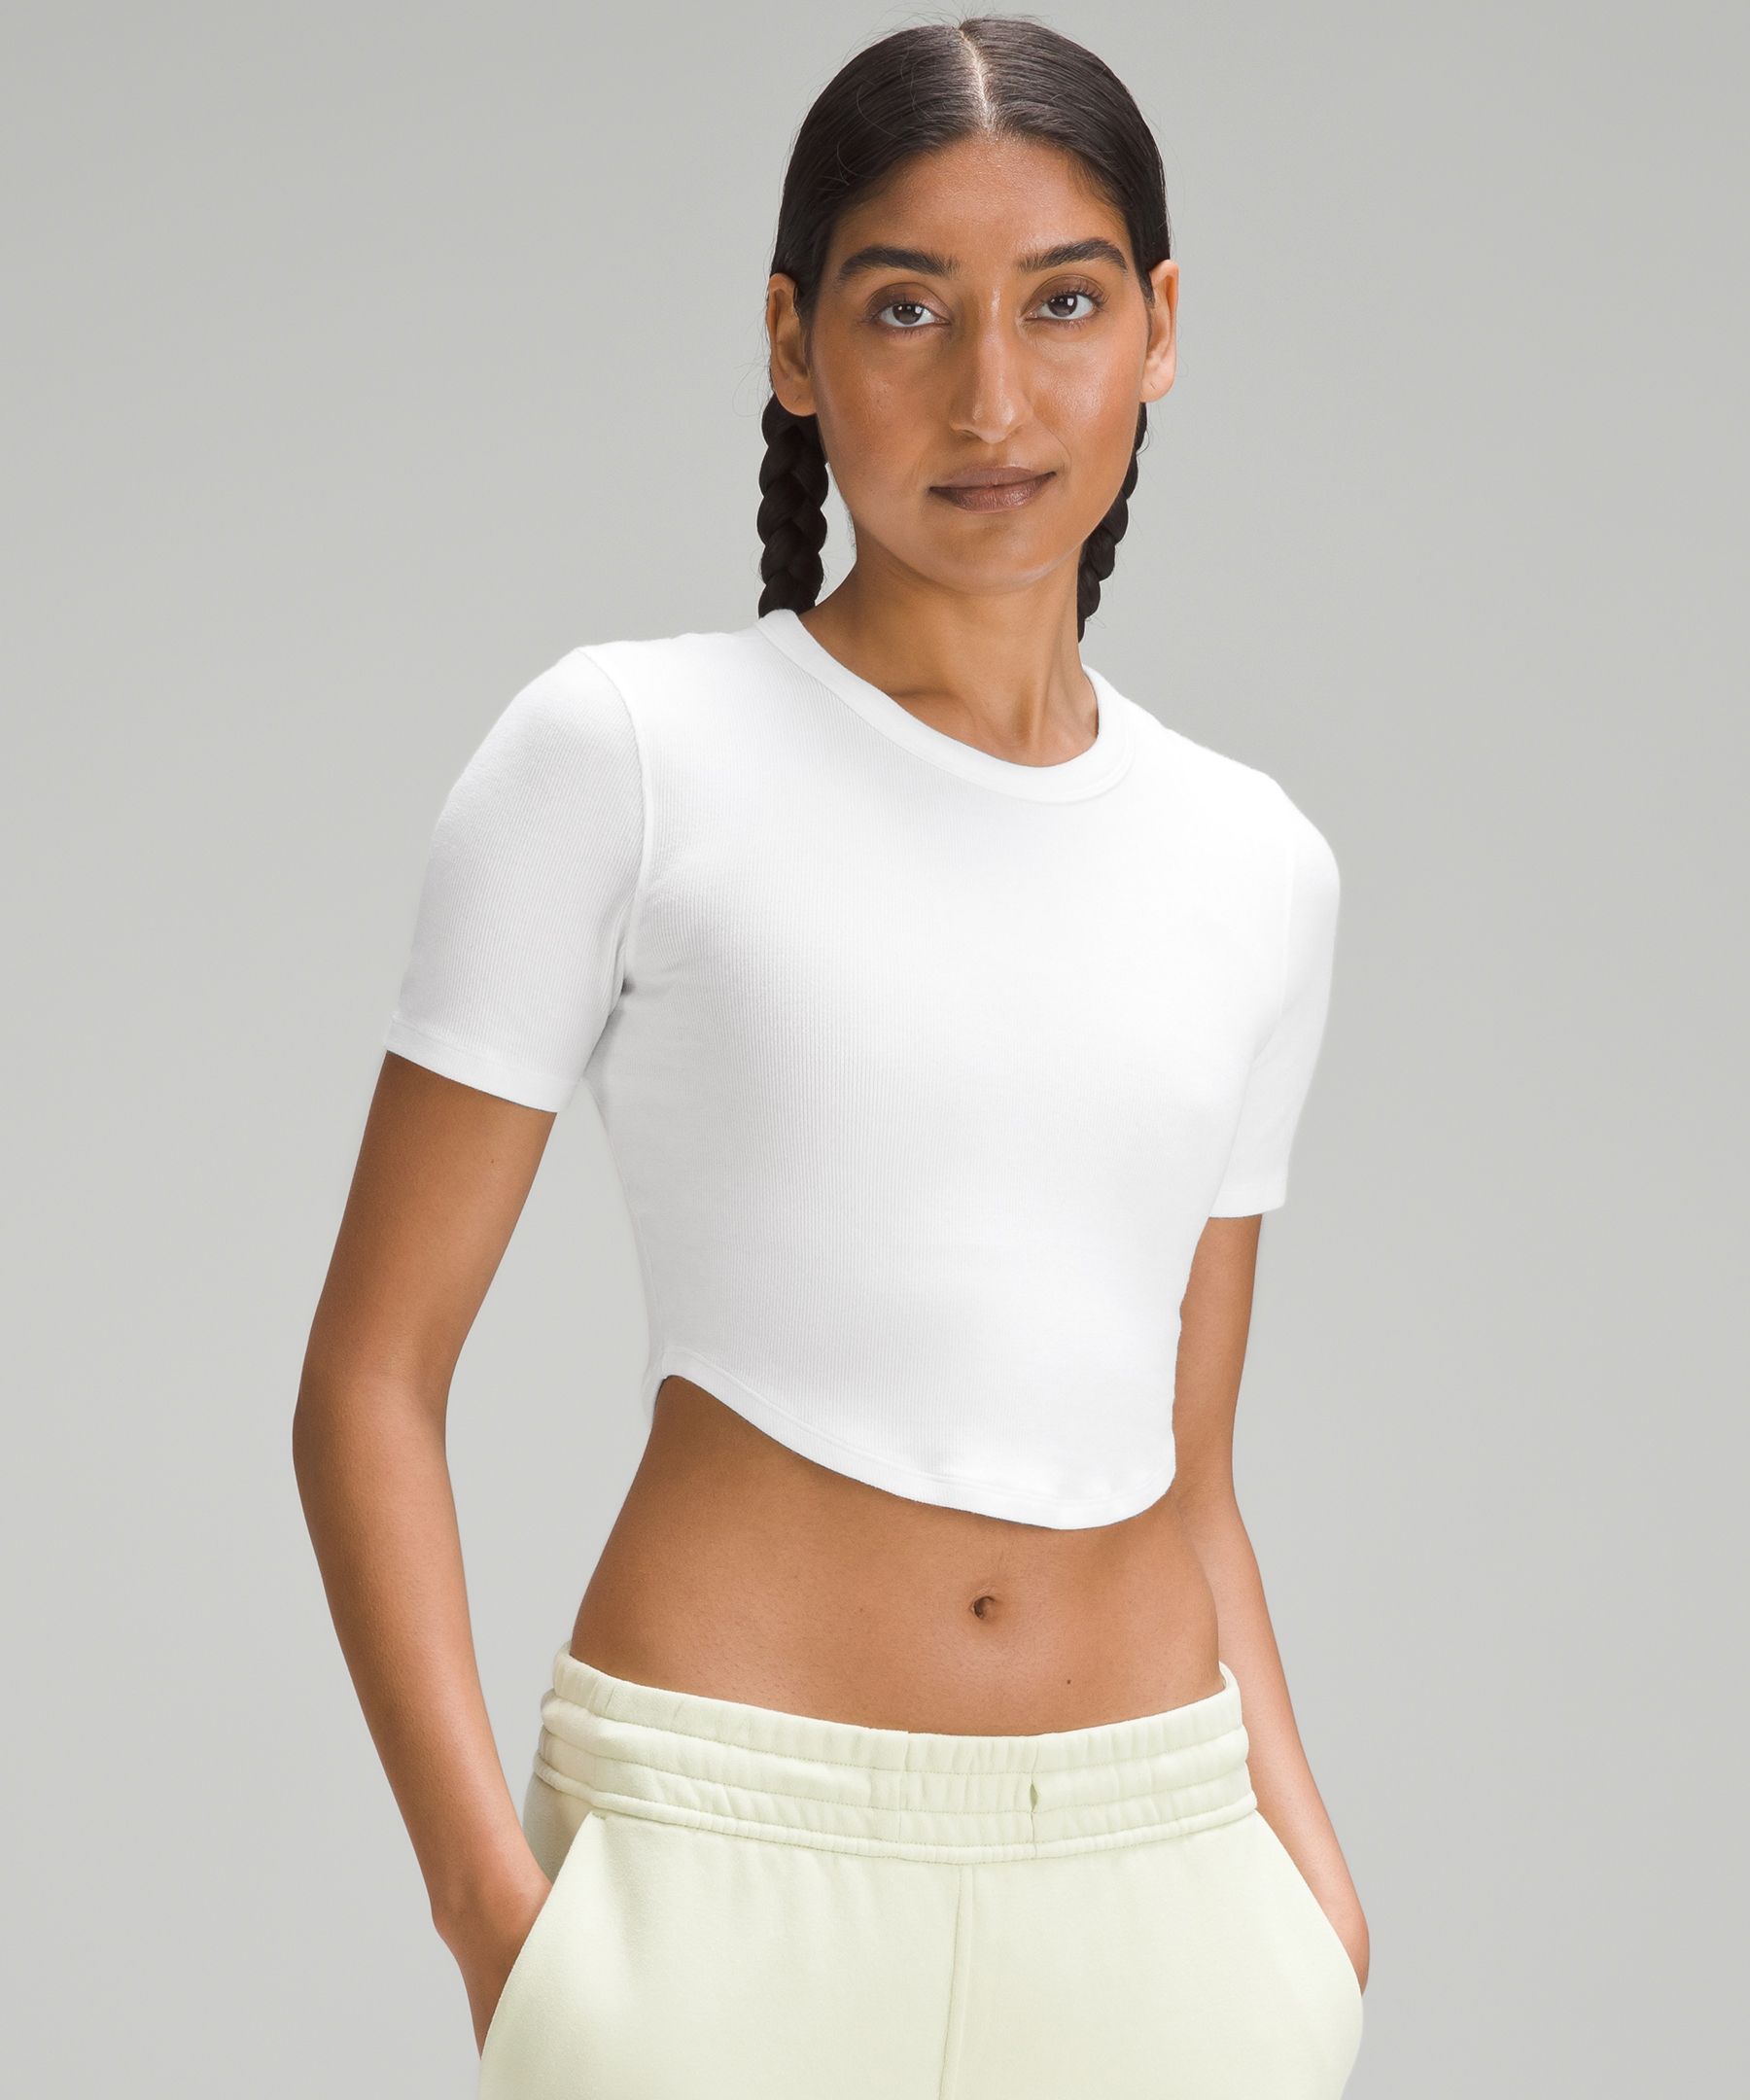 Tight Fit Shirts for Women